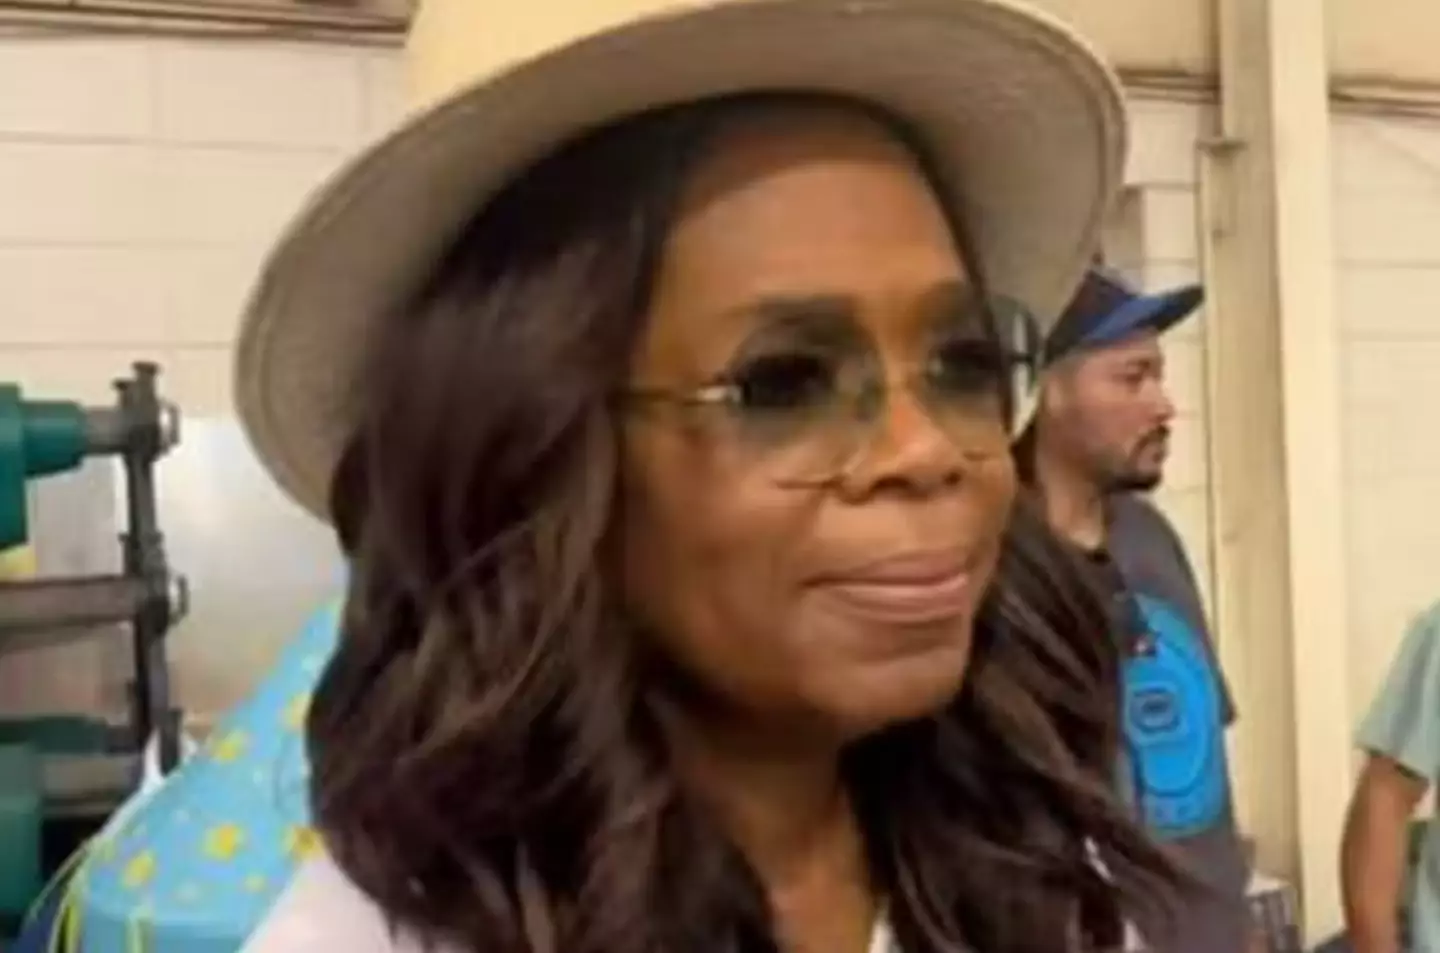 Oprah was interviewed by a film crew at a shelter last week.